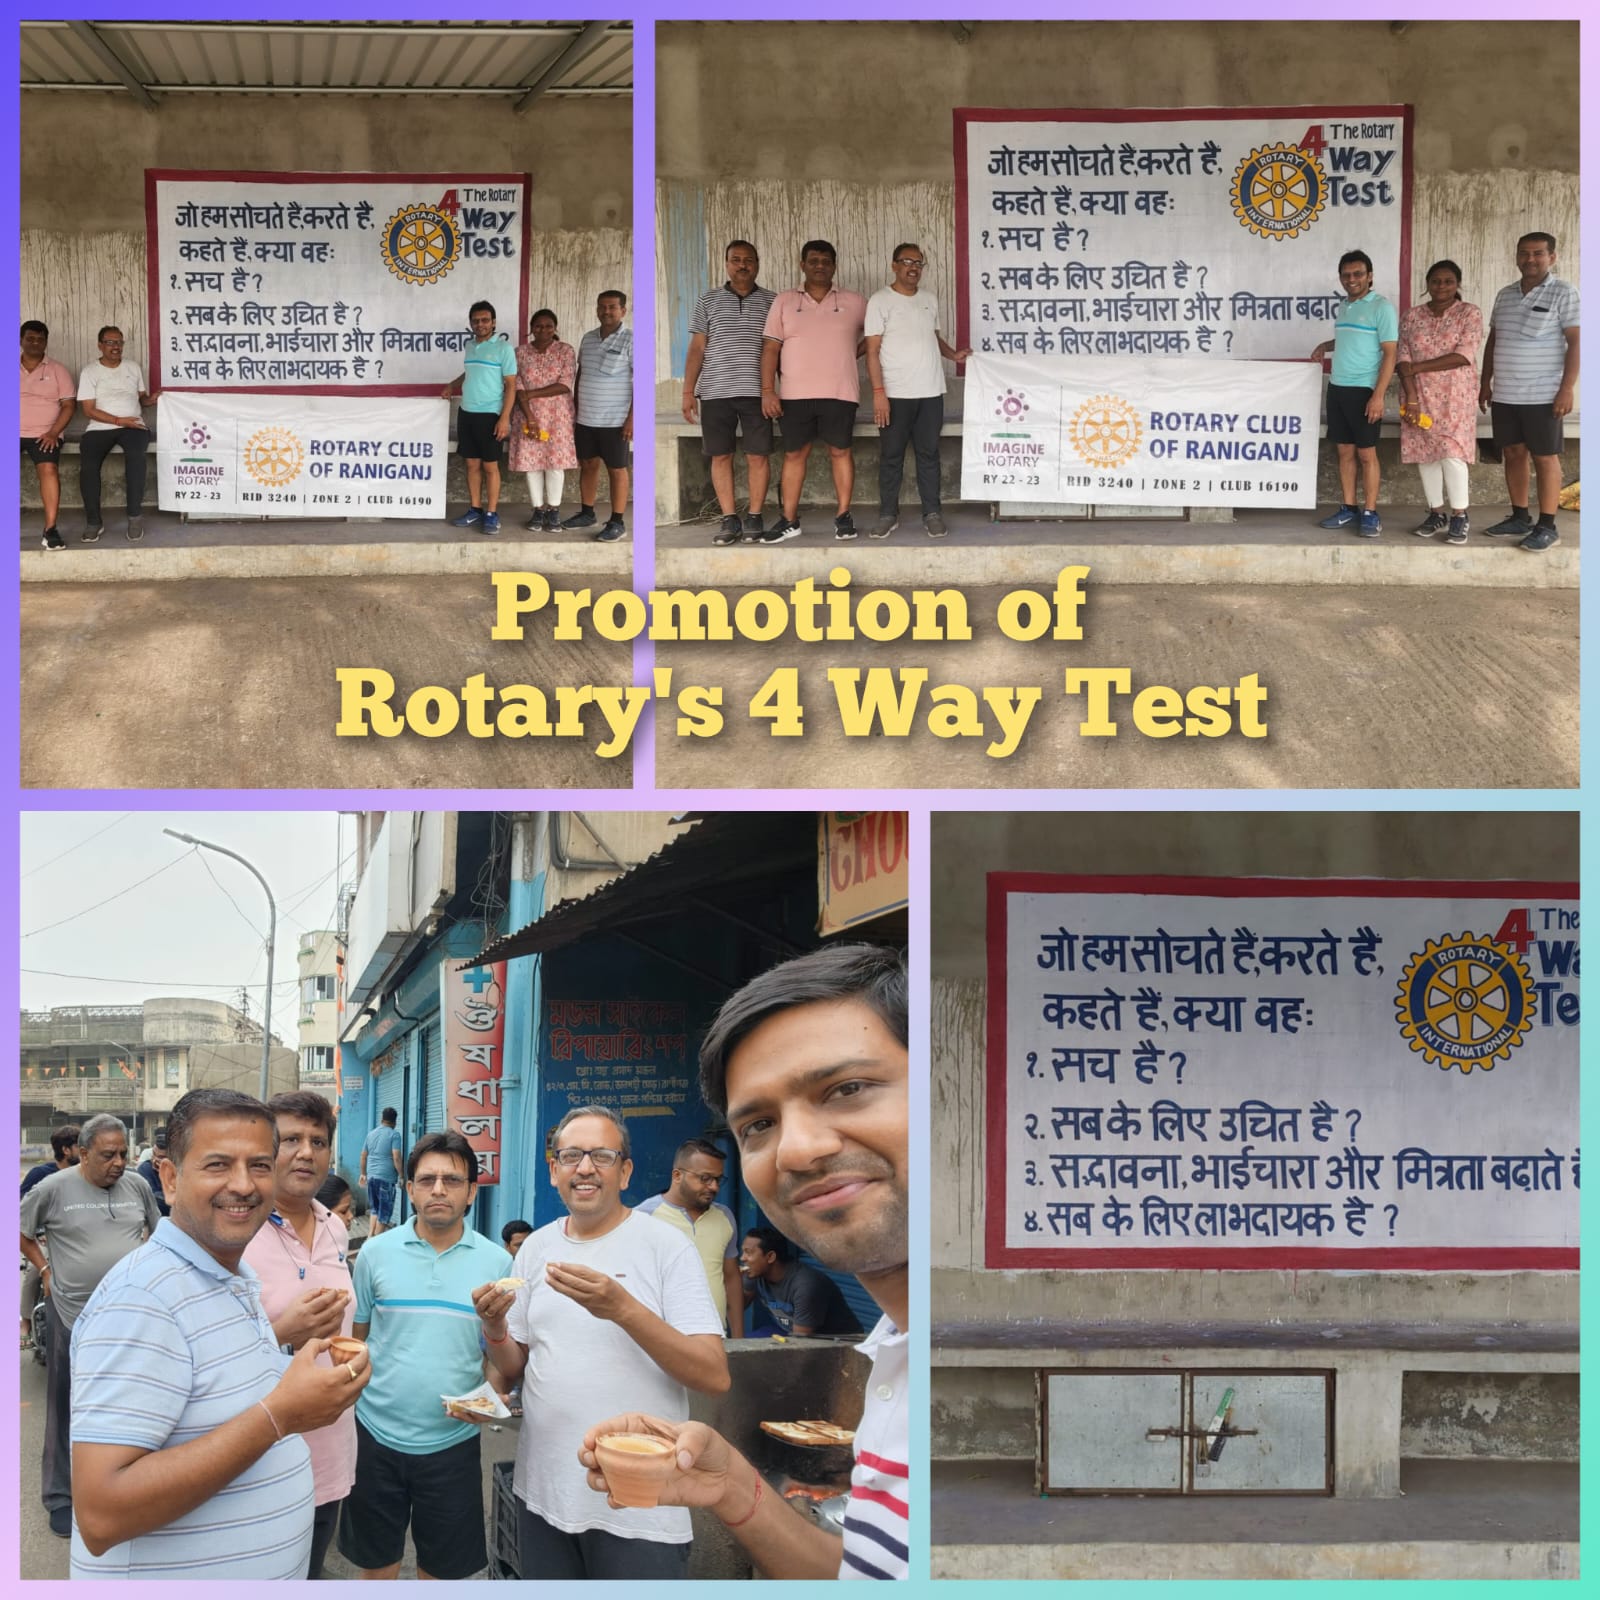 Promotion of Rotary’s 4 –Way Test at Pandit Pokhar , a prominent place at Raniganj